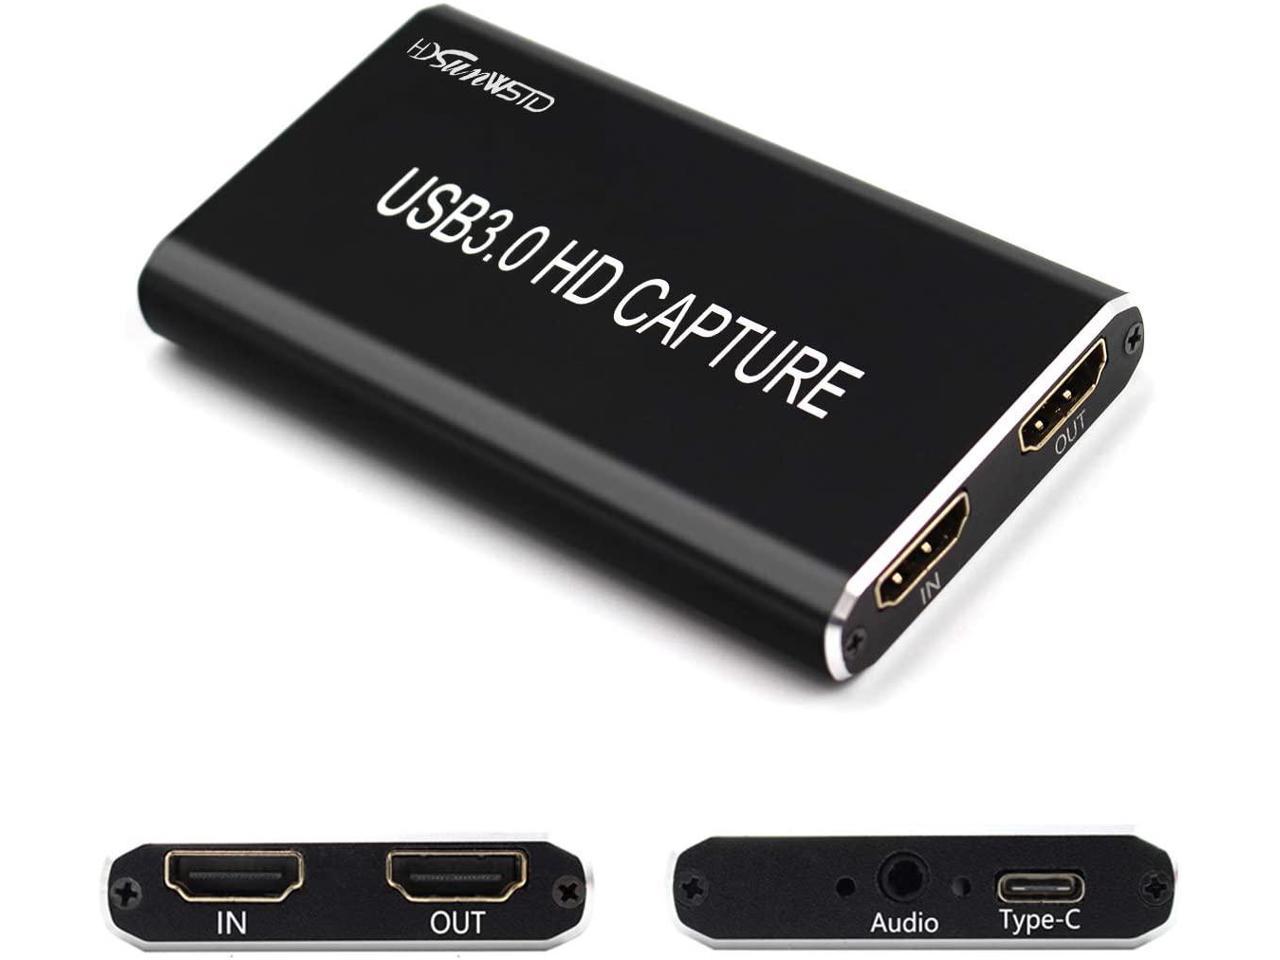 USB 3.0 HDMI Game Capture Karte 1080P 60fps Video Capture Device Card Converters Game Streaming Live Stream Broadcast für Windows Linux Os X Systeme HDMI HD Video Capture 5 Ports-Gold 